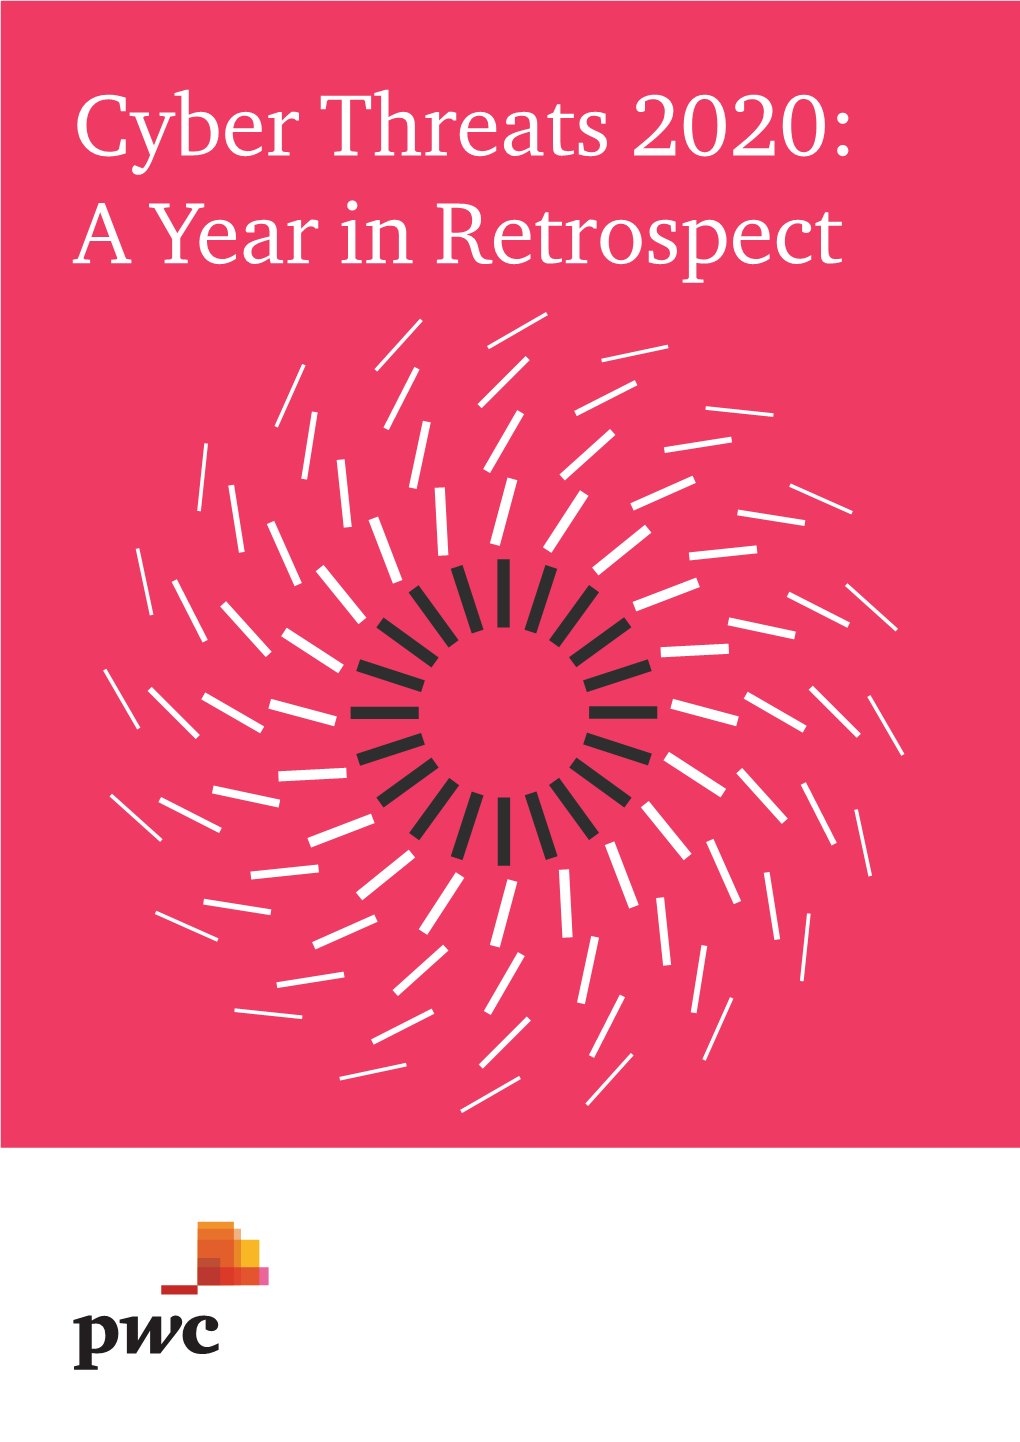 Cyber Threats 2020: a Year in Retrospect Contents